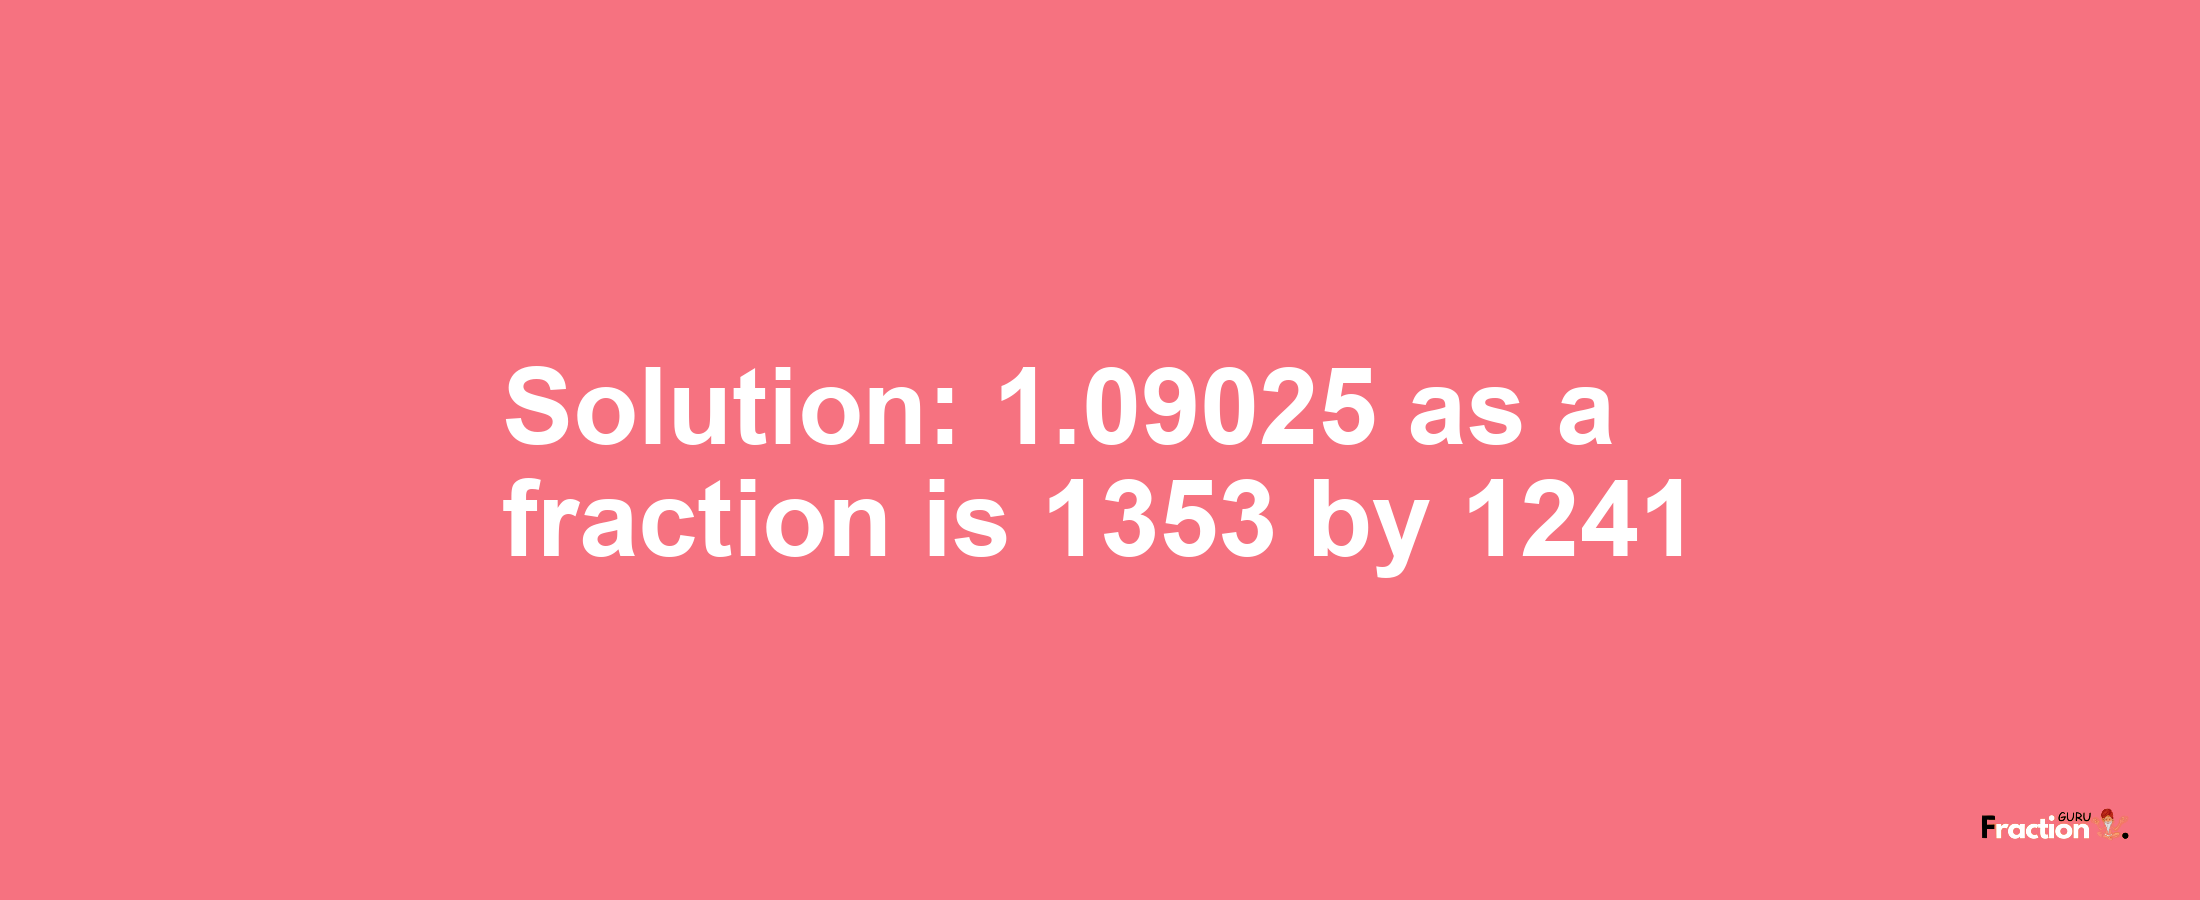 Solution:1.09025 as a fraction is 1353/1241